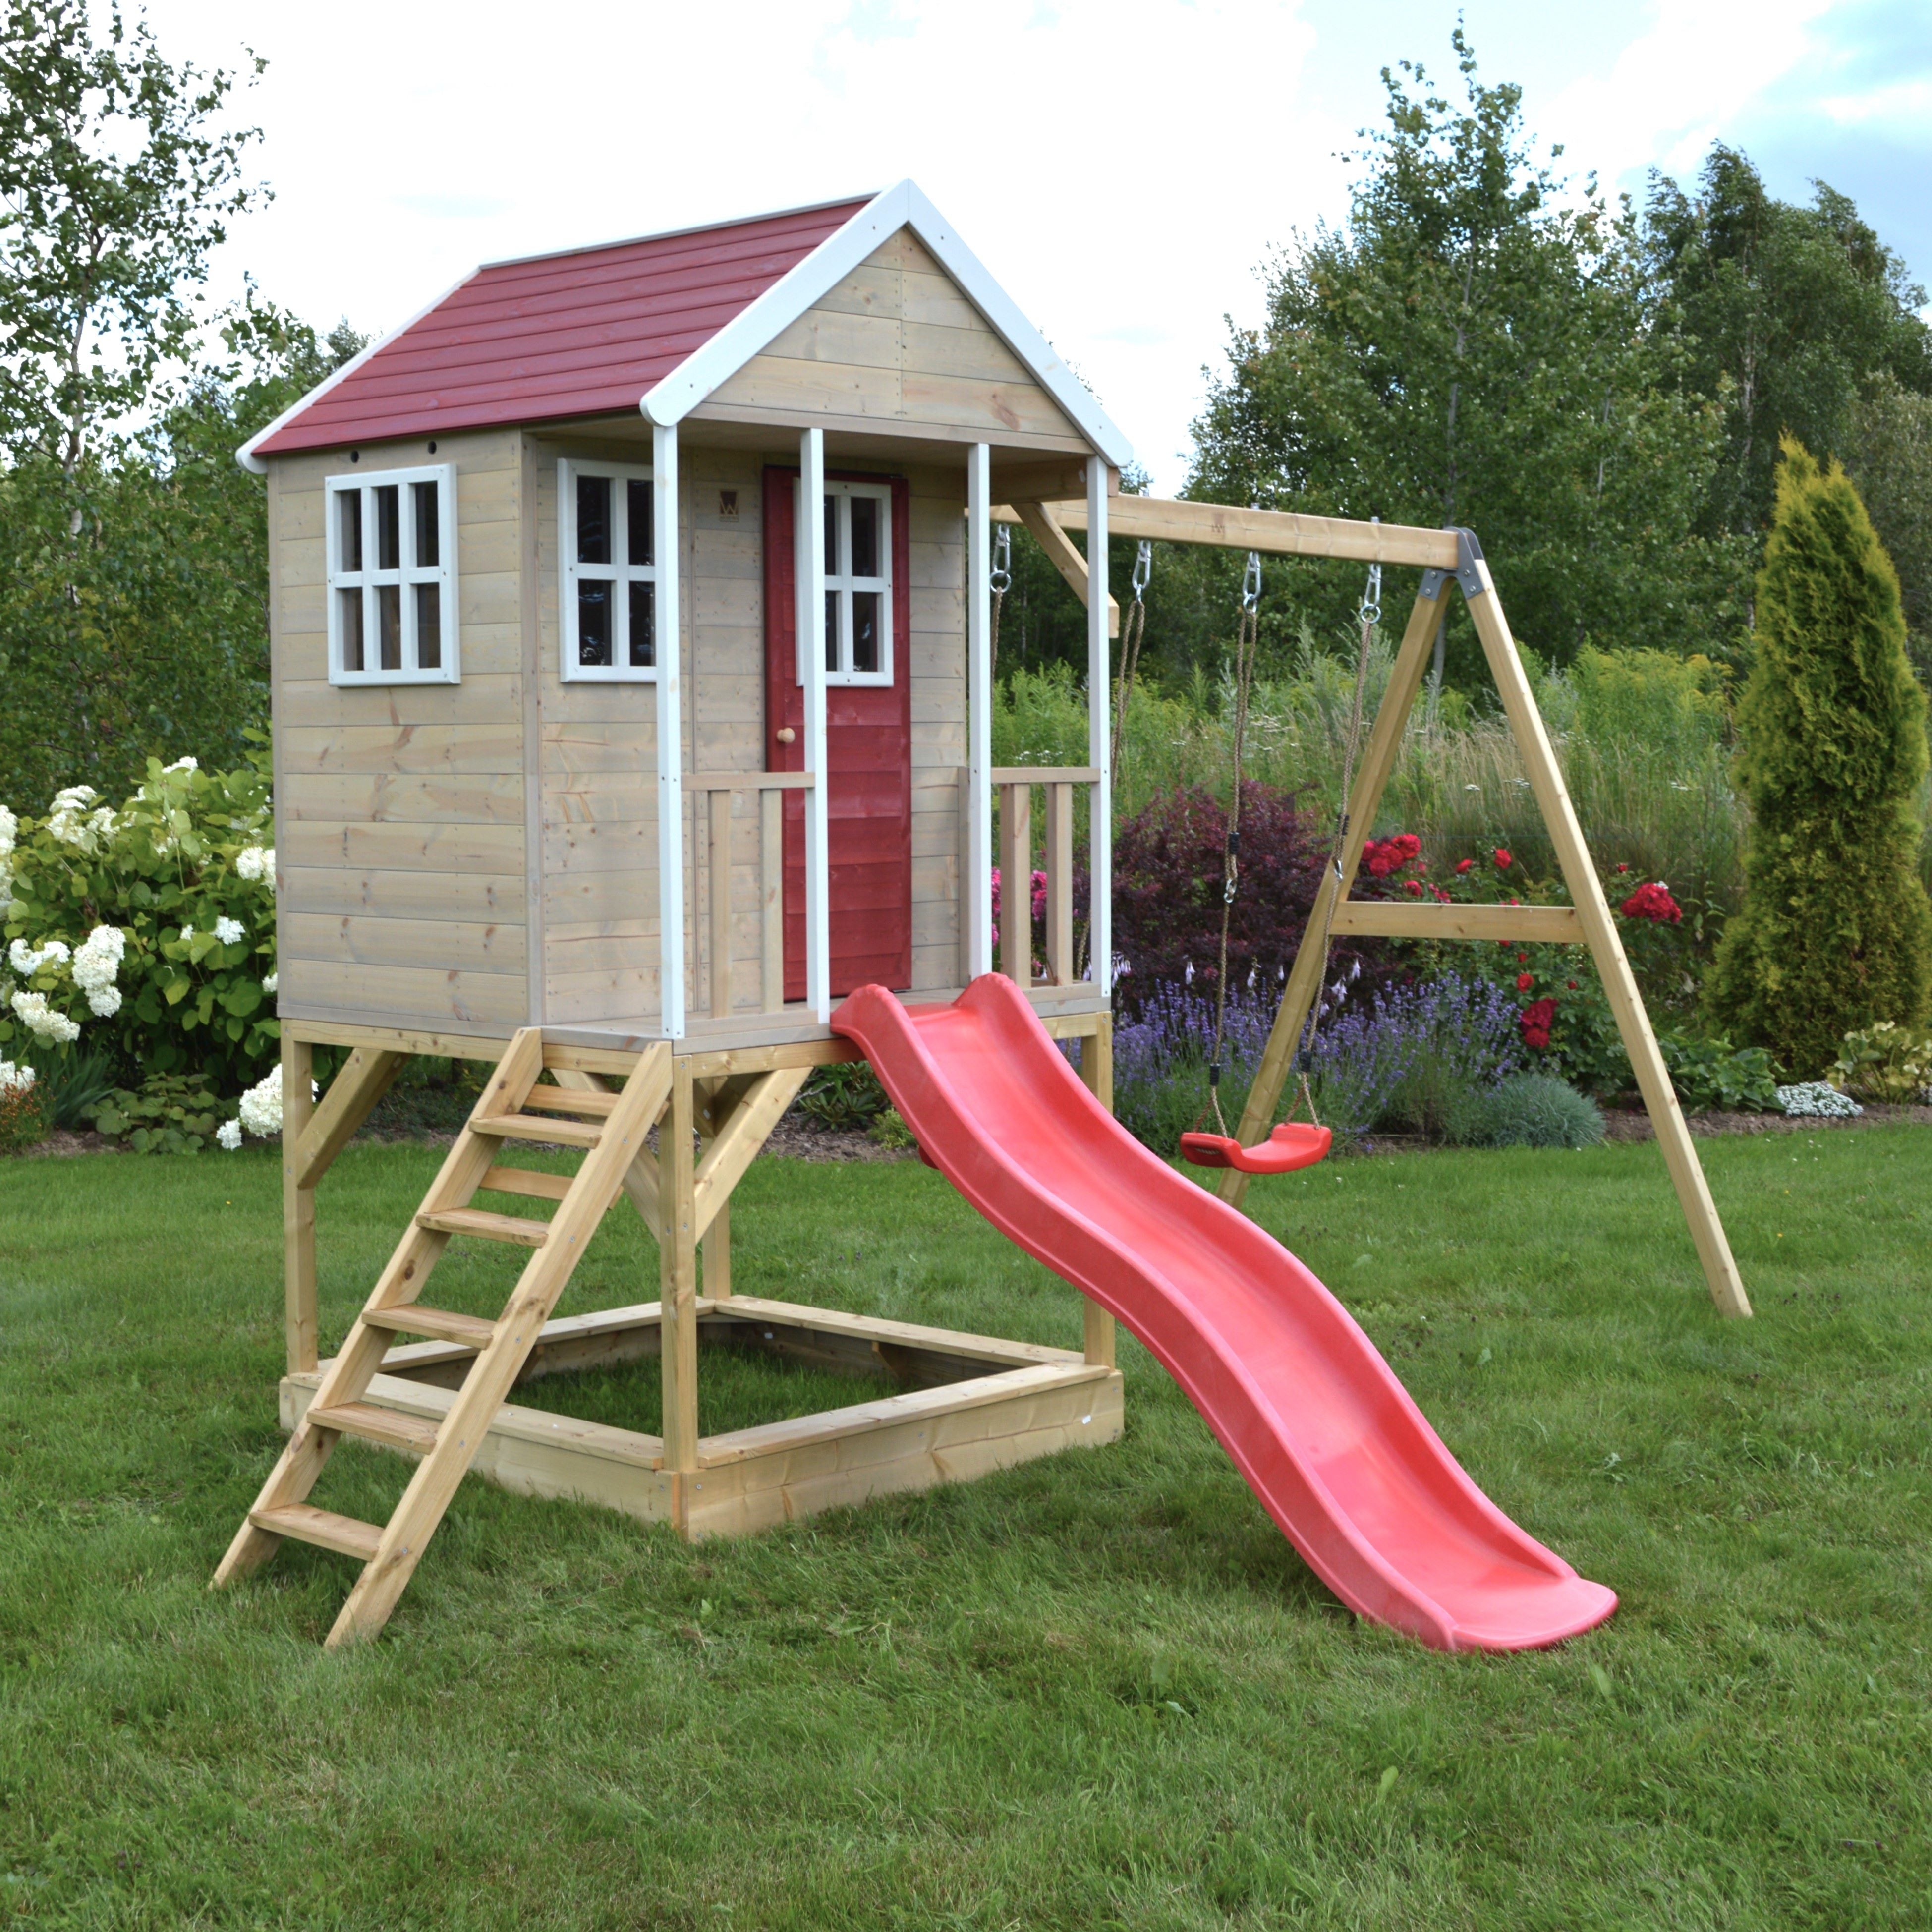 M30R-GK Nordic Adventure House with Platform, Slide and Double Swing + Gym & Kitchen Attachment